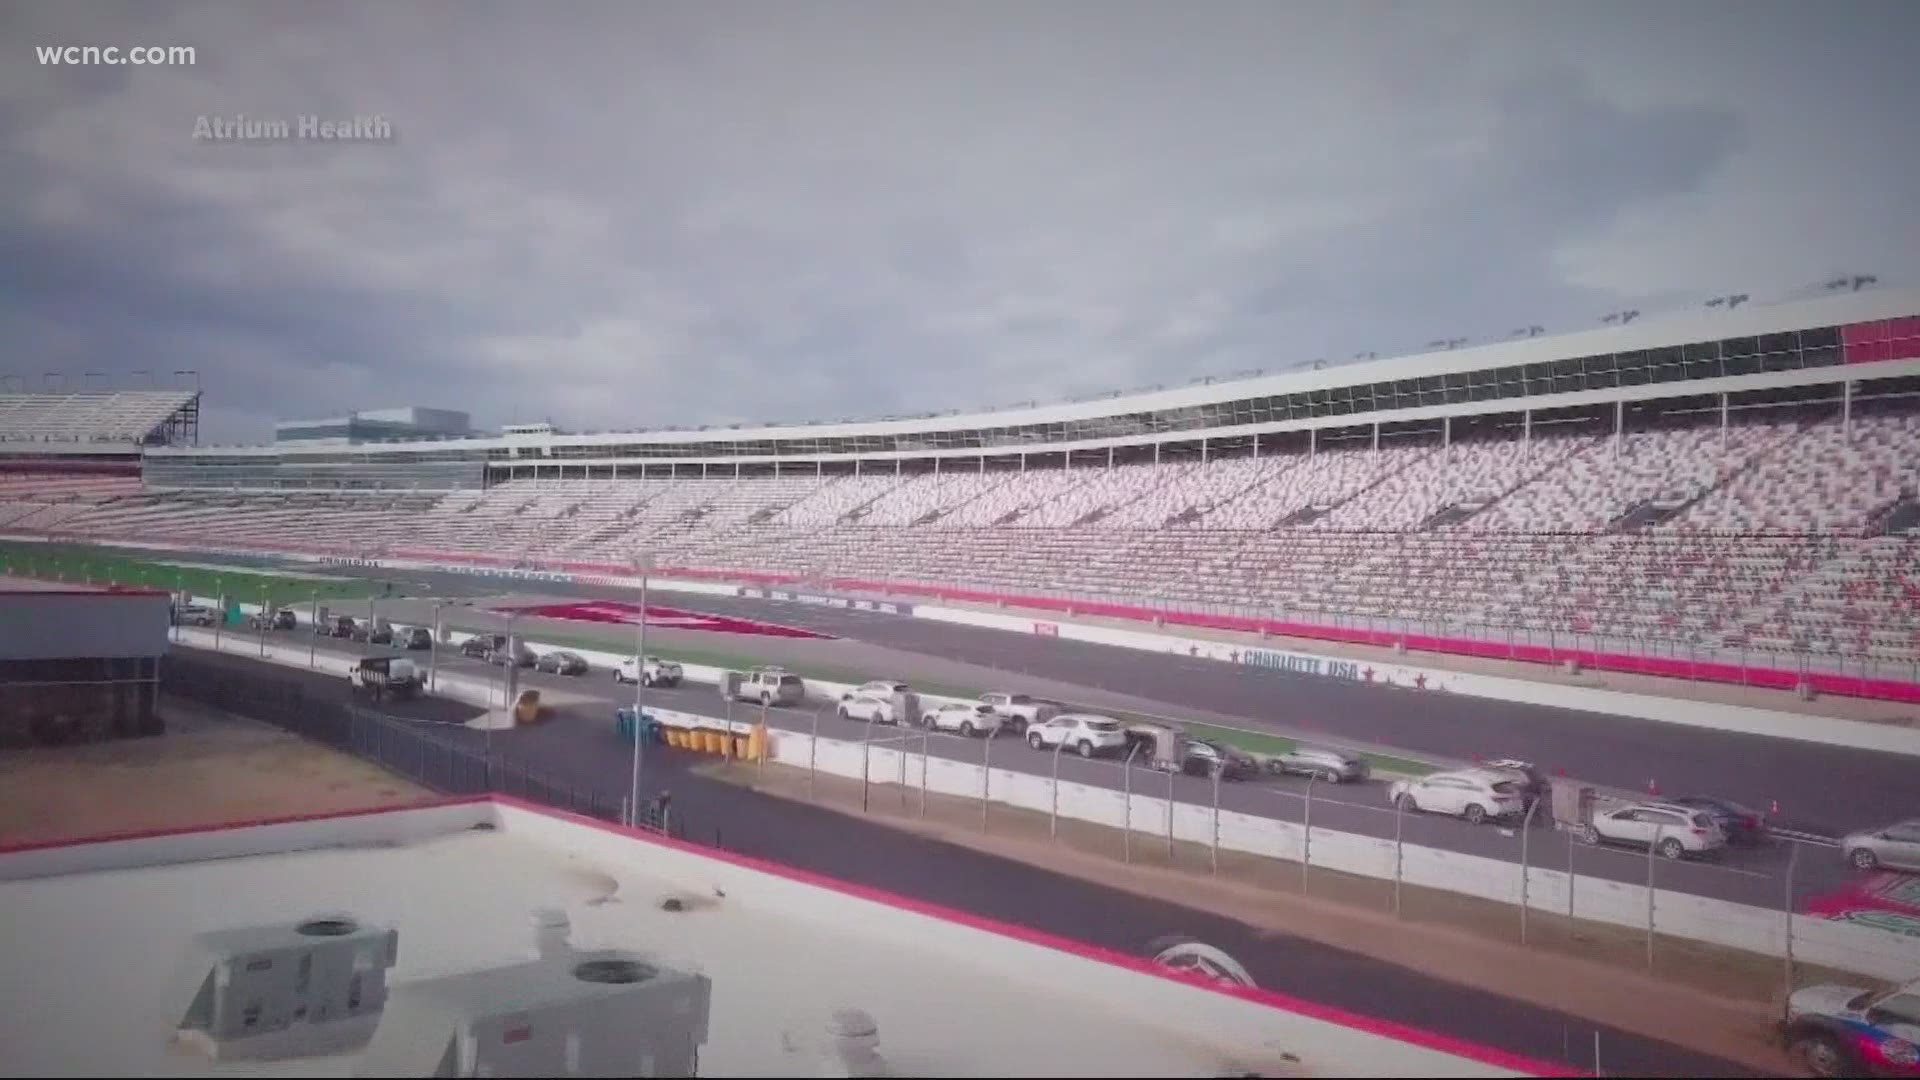 Charlotte Motor Speedway became North Carolina's first major sporting venue to offer mass COVID-19 vaccines, with over 16,000 appointments this weekend.